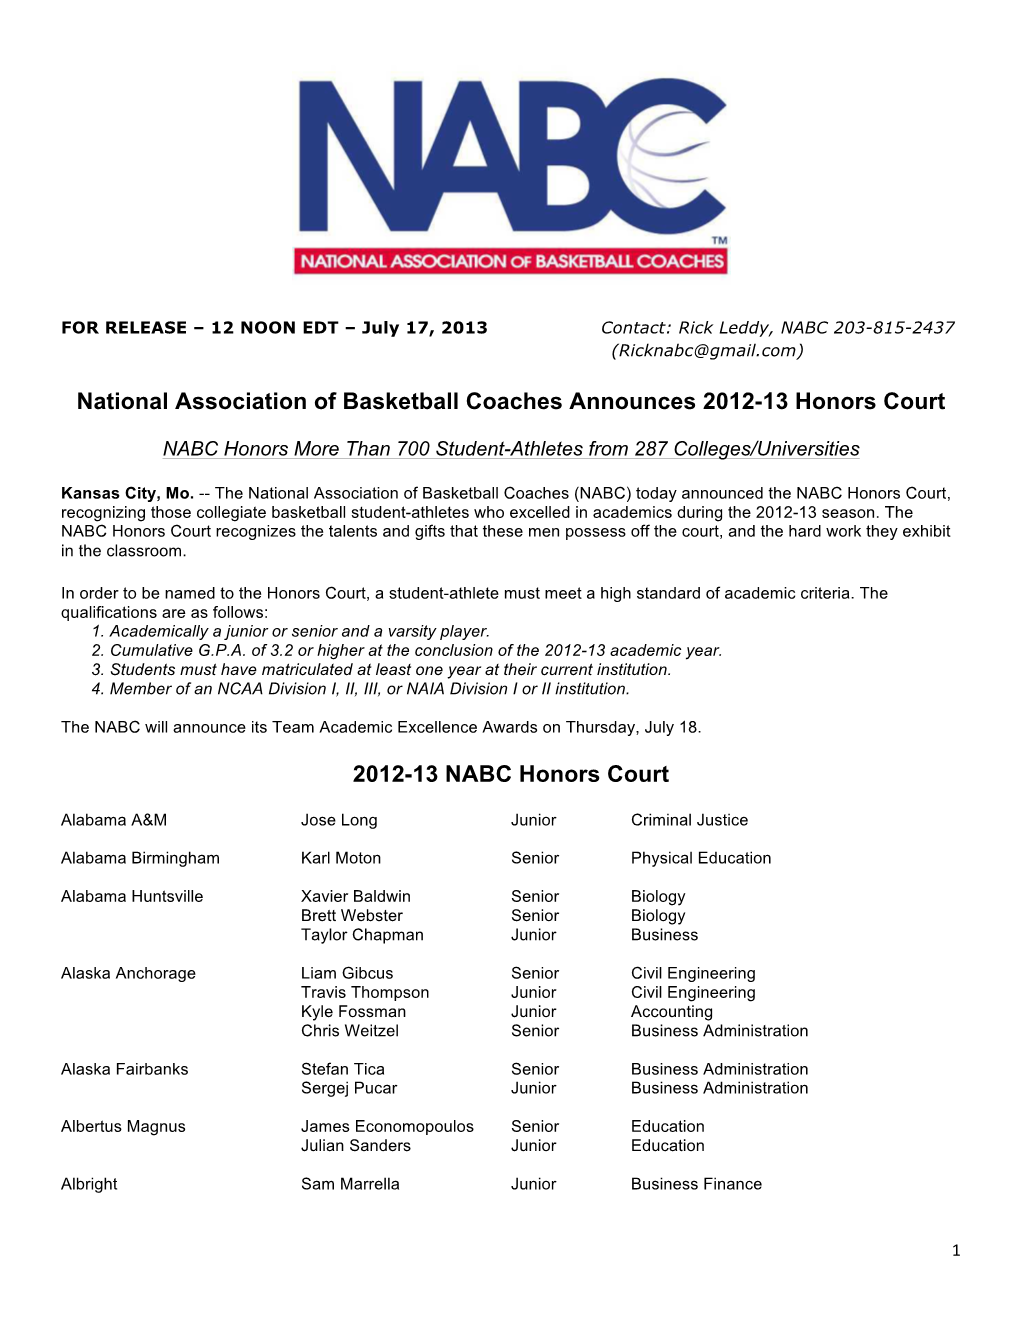 National Association of Basketball Coaches Announces 2012-13 Honors Court